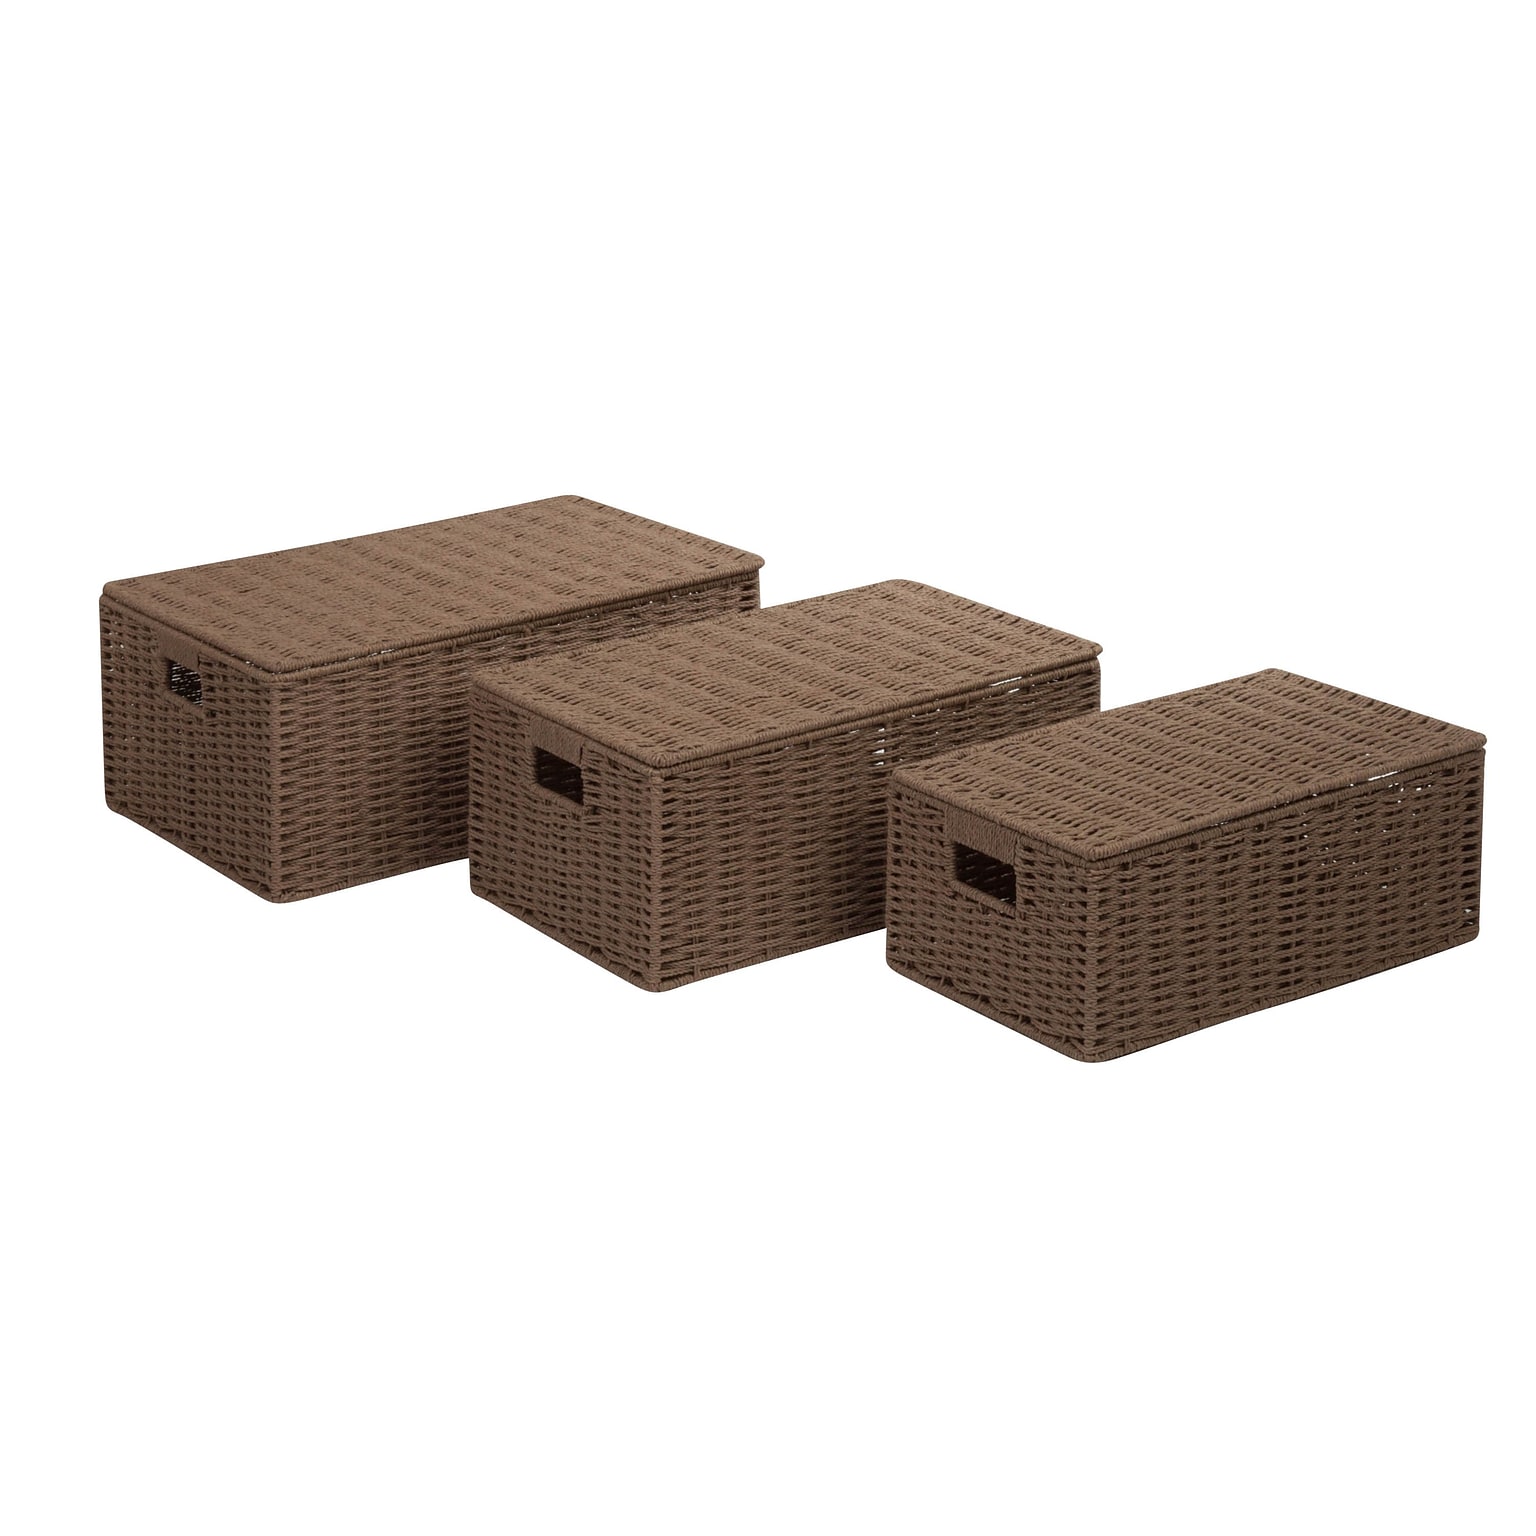 Honey-Can-Do Small Seagrass Baskets with Handles - Set of 3, Natural Taupe (STO-03557)